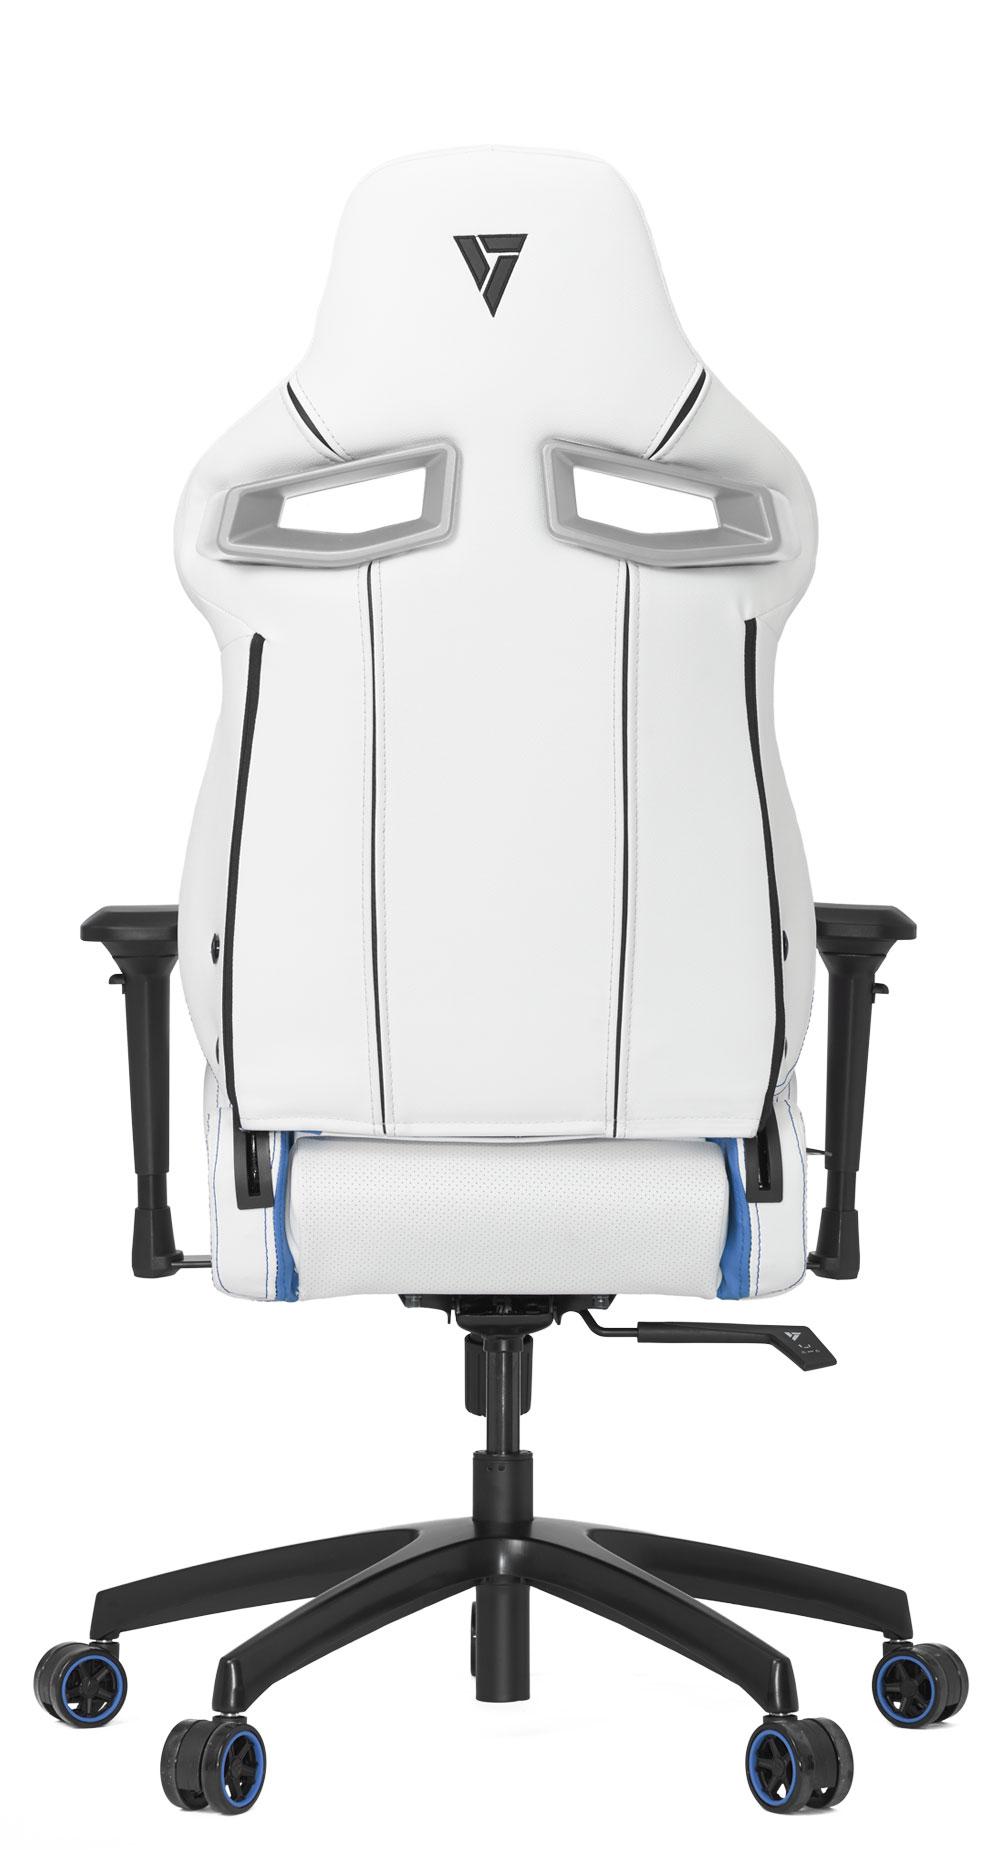 vertagear-racing-series-sl4000-white-and-blue-gaming-chair-1000px-v10001.jpg